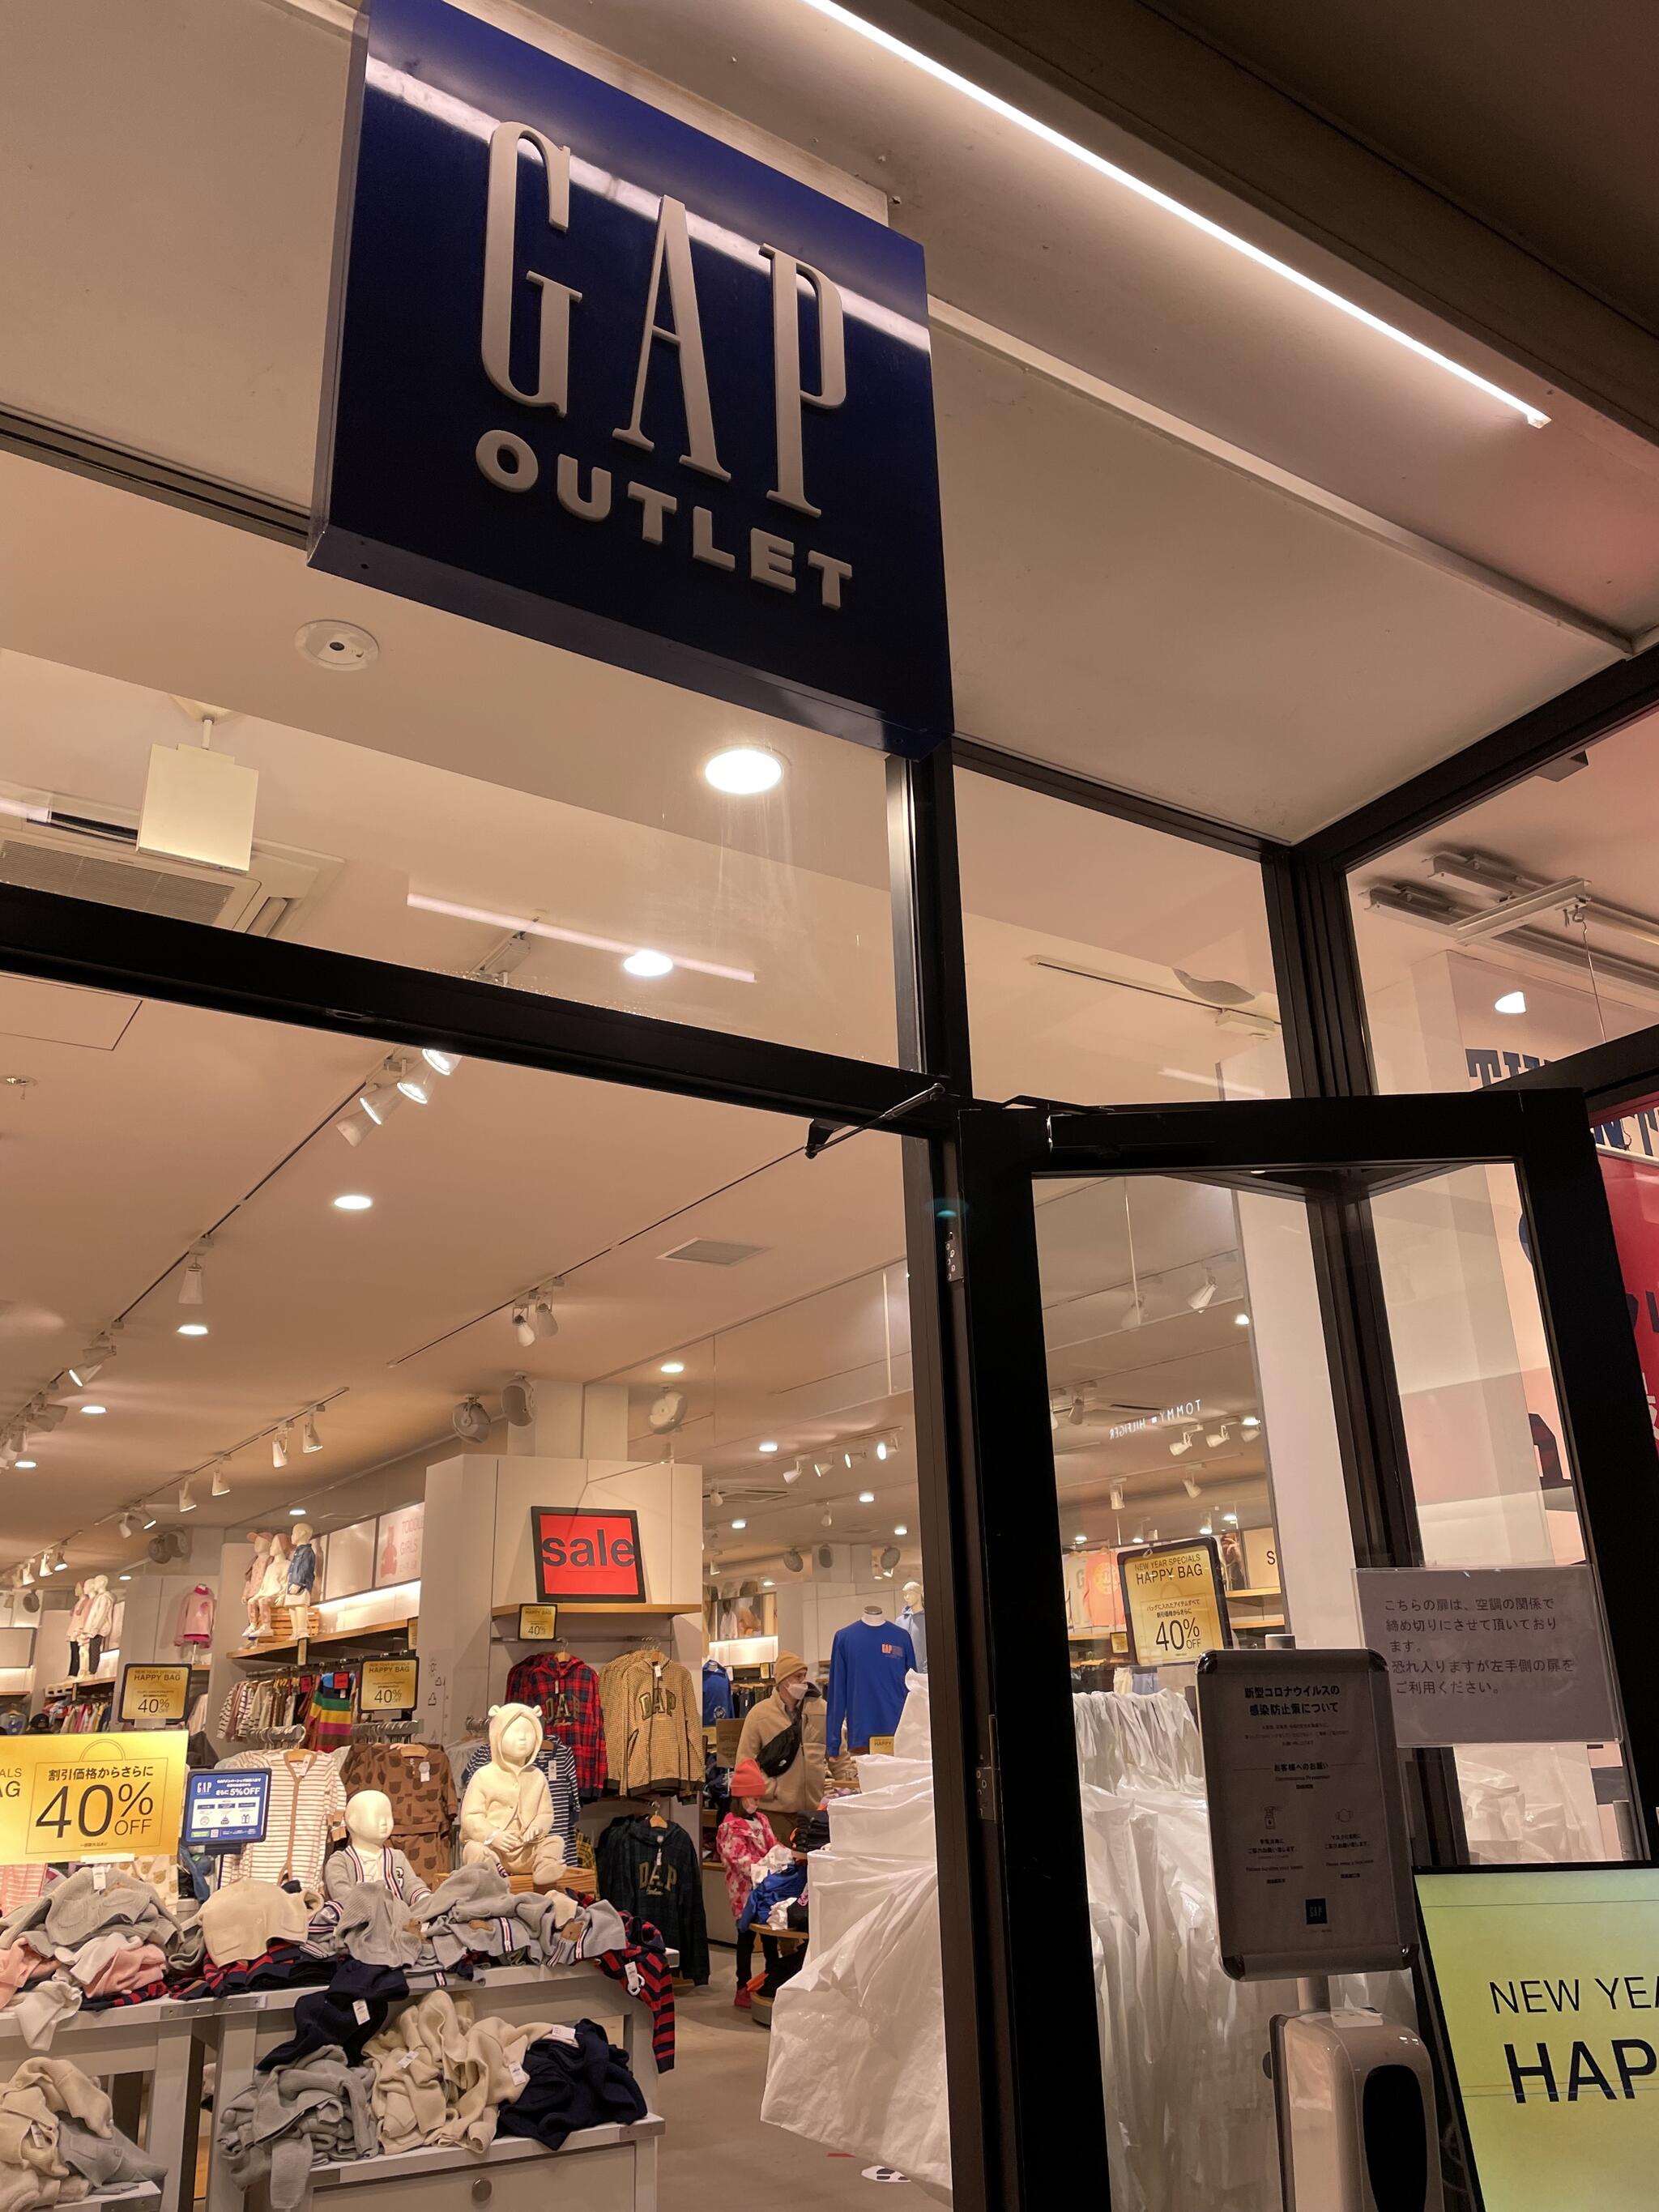 GAP Outlet 三井アウトレットパーク木更津店の代表写真1